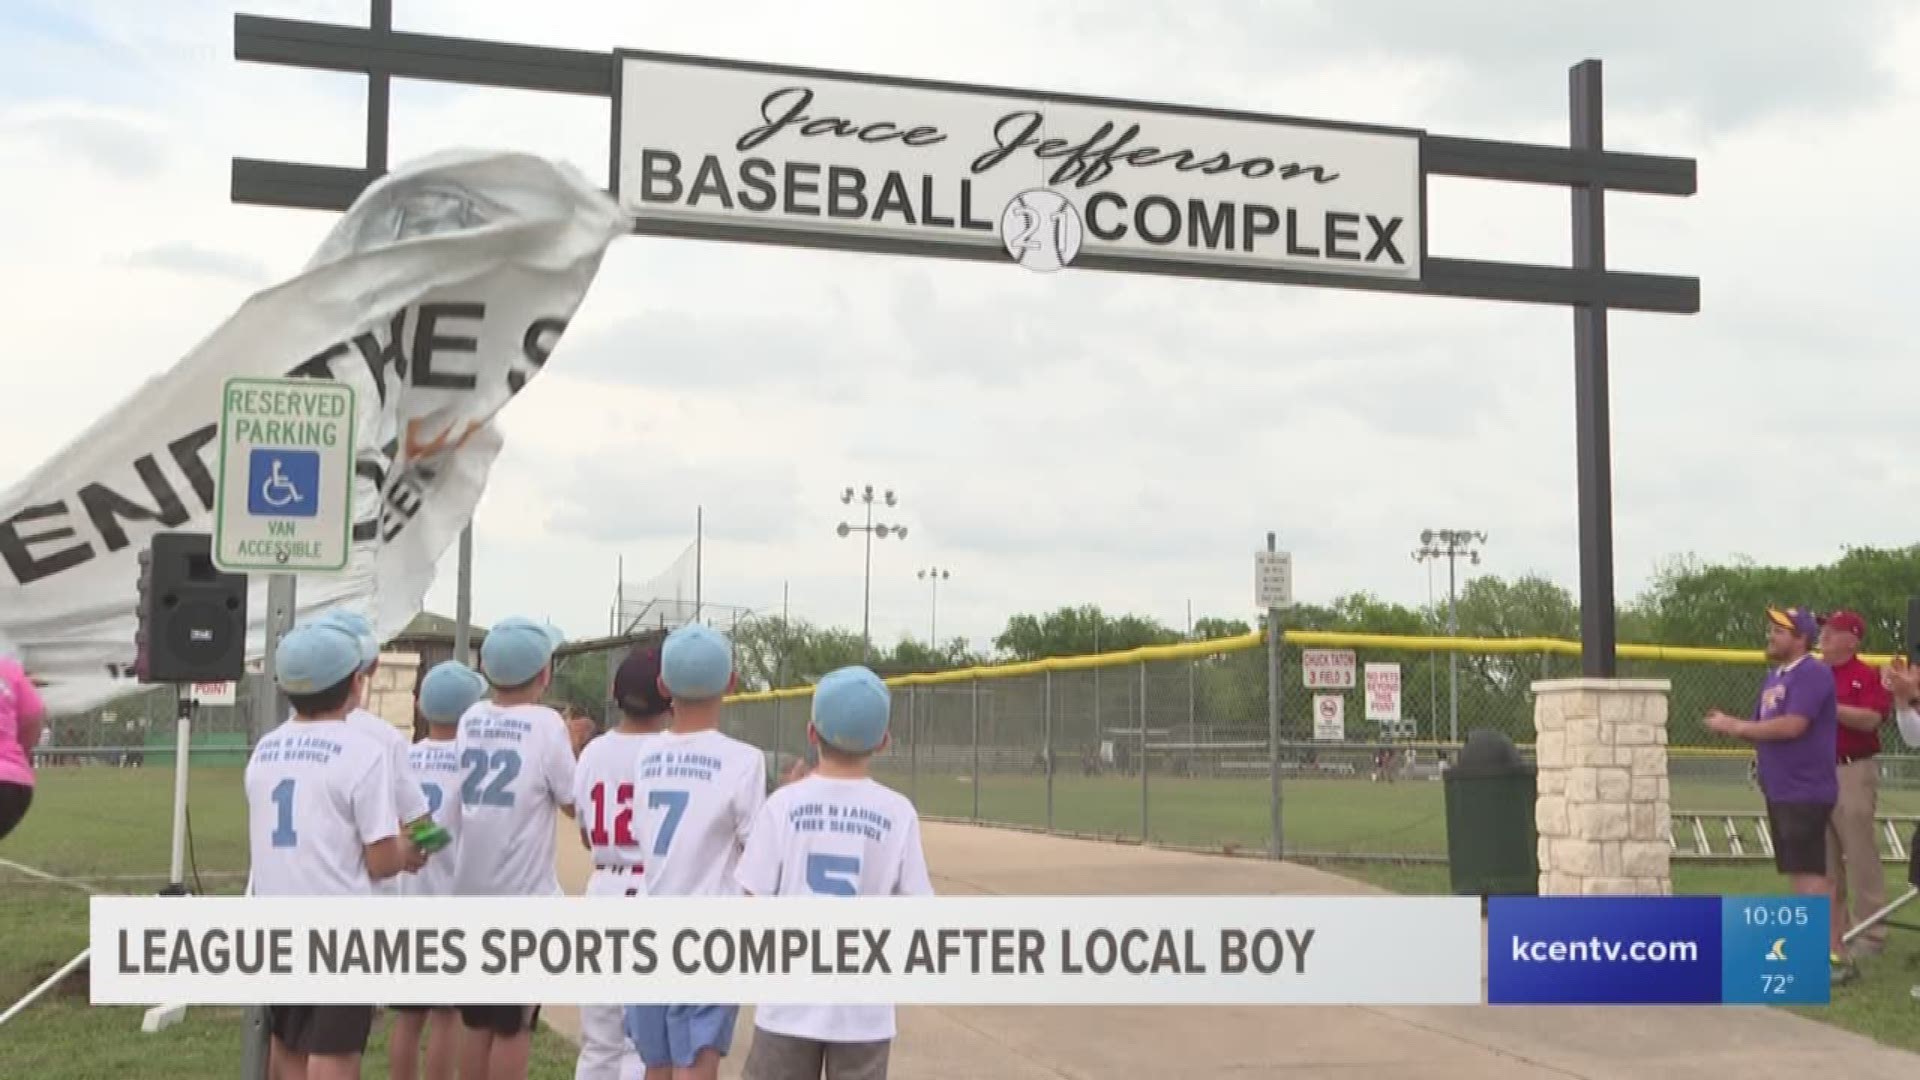 The legacy of a 12-year-old Belton boy who died tragically in 2016 will be cemented Monday when a baseball and softball complex officially becomes his namesake.

Jace Jefferson was diagnosed with a type of brain cancer in June 2015. He passed away almost a year and half after that diagnosis.